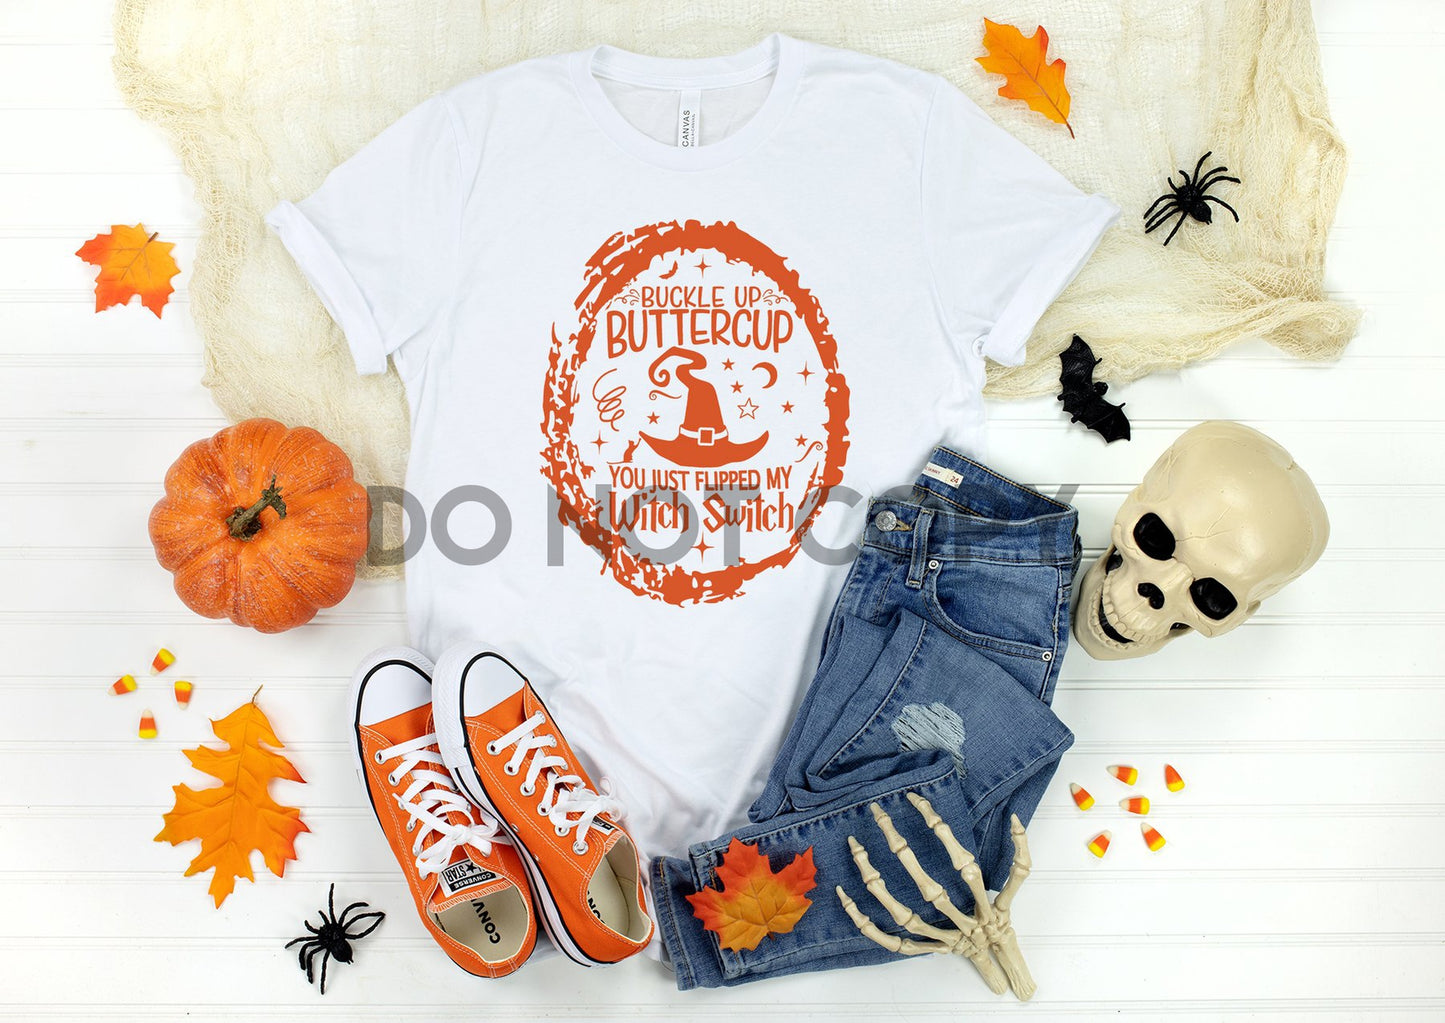 Buckle Up Buttercup You Just Flipped my Witch Switch Orange Sublimation Print